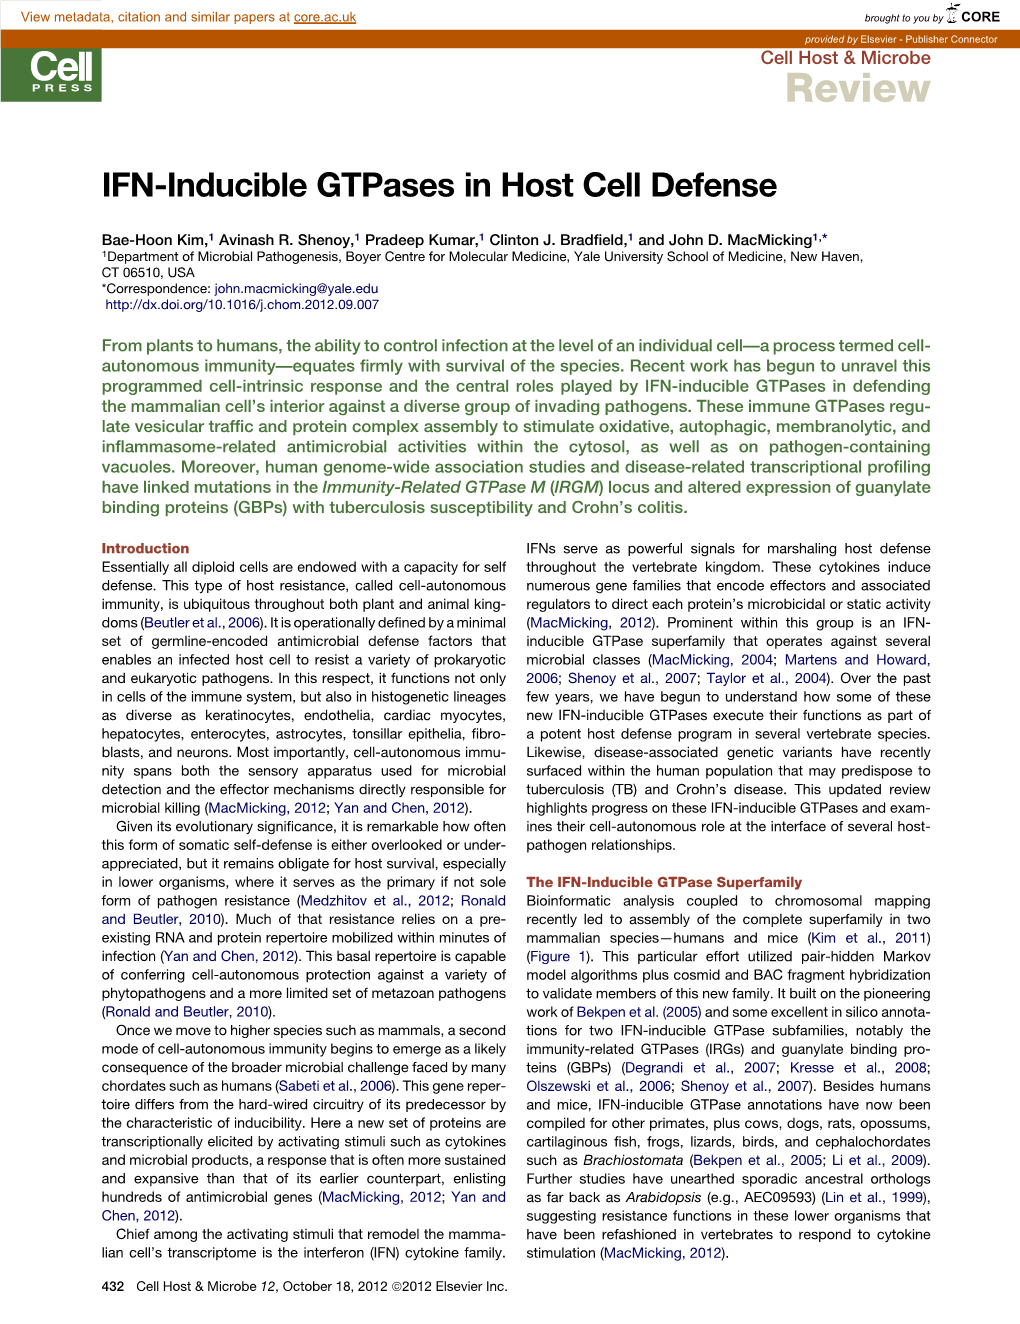 IFN-Inducible Gtpases in Host Cell Defense